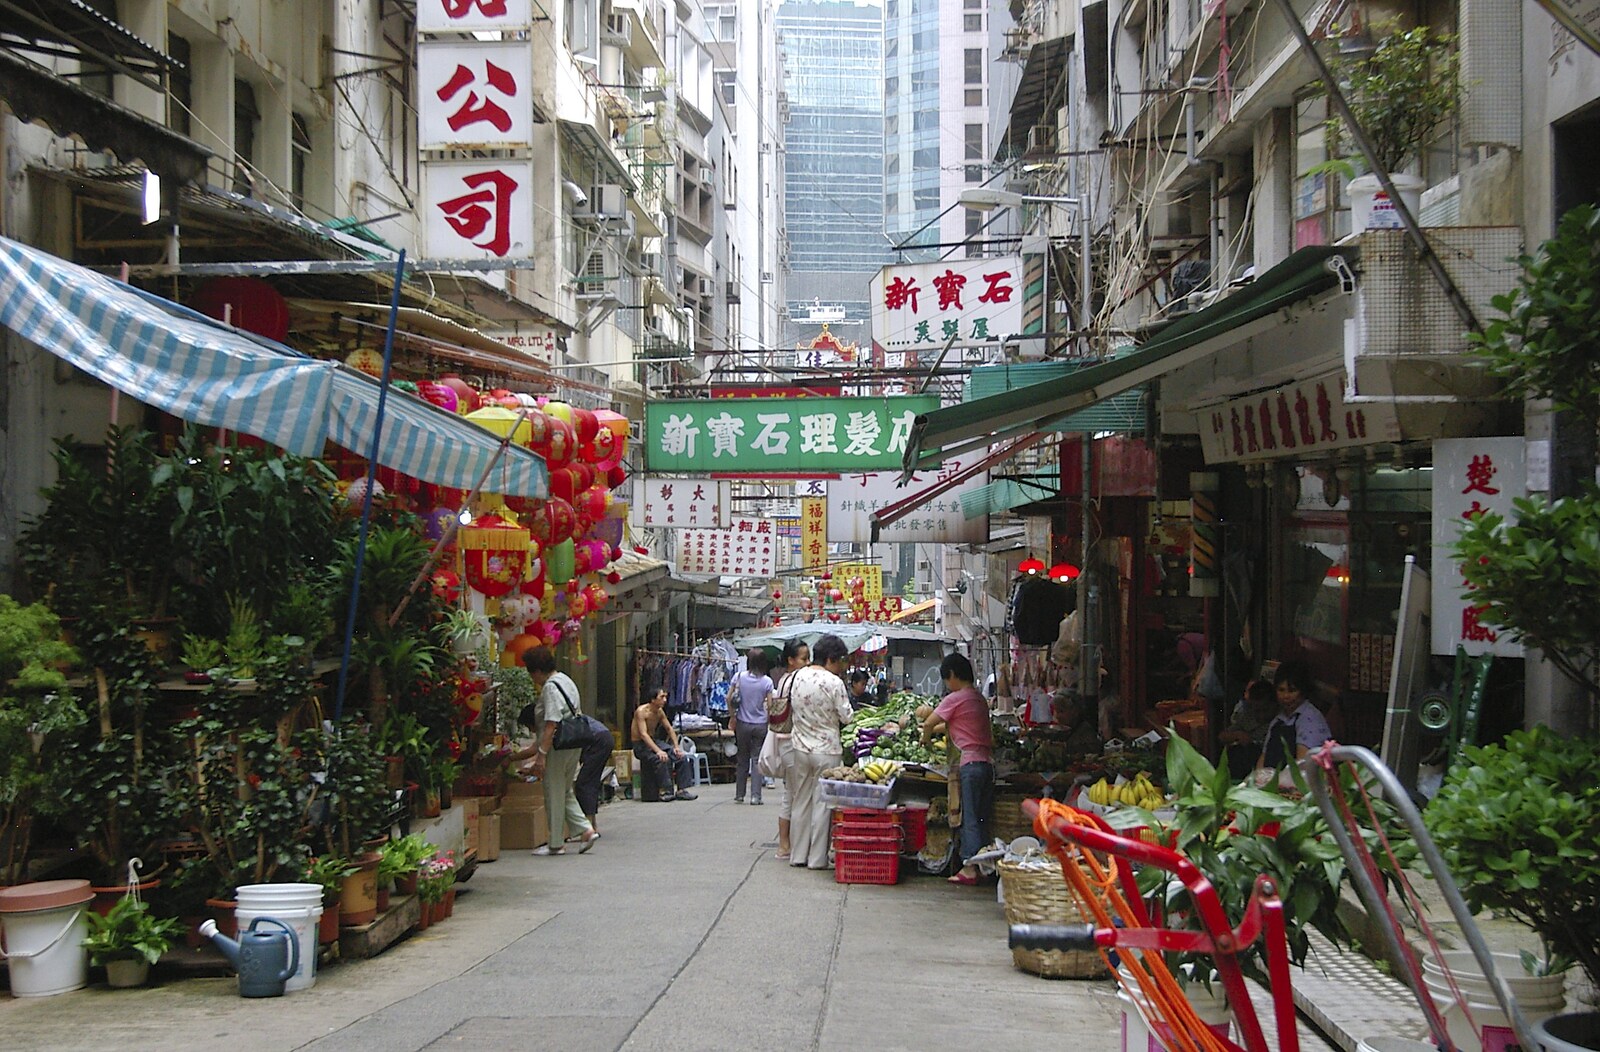 A view down the plants-and-vegetables street from Lan Kwai Fong Market, Hong Kong, China - 4th October 2006